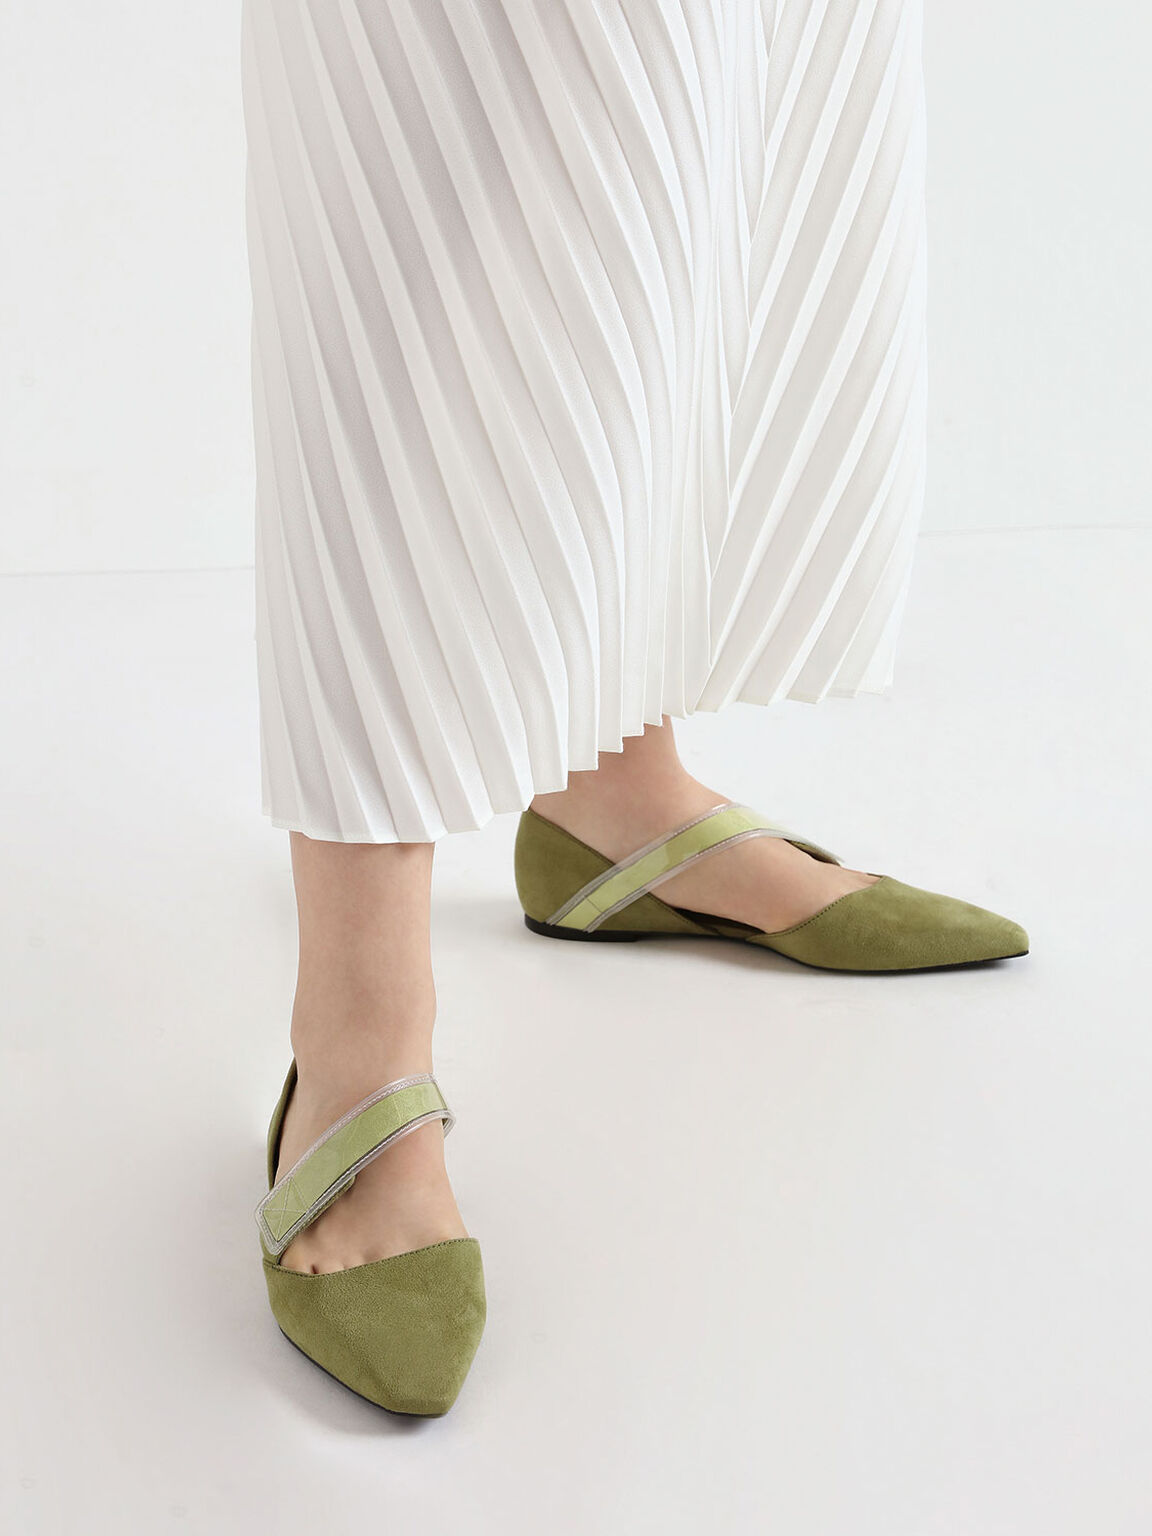 Asymmetric See-Through Strap Mary Jane Flats, Olive, hi-res